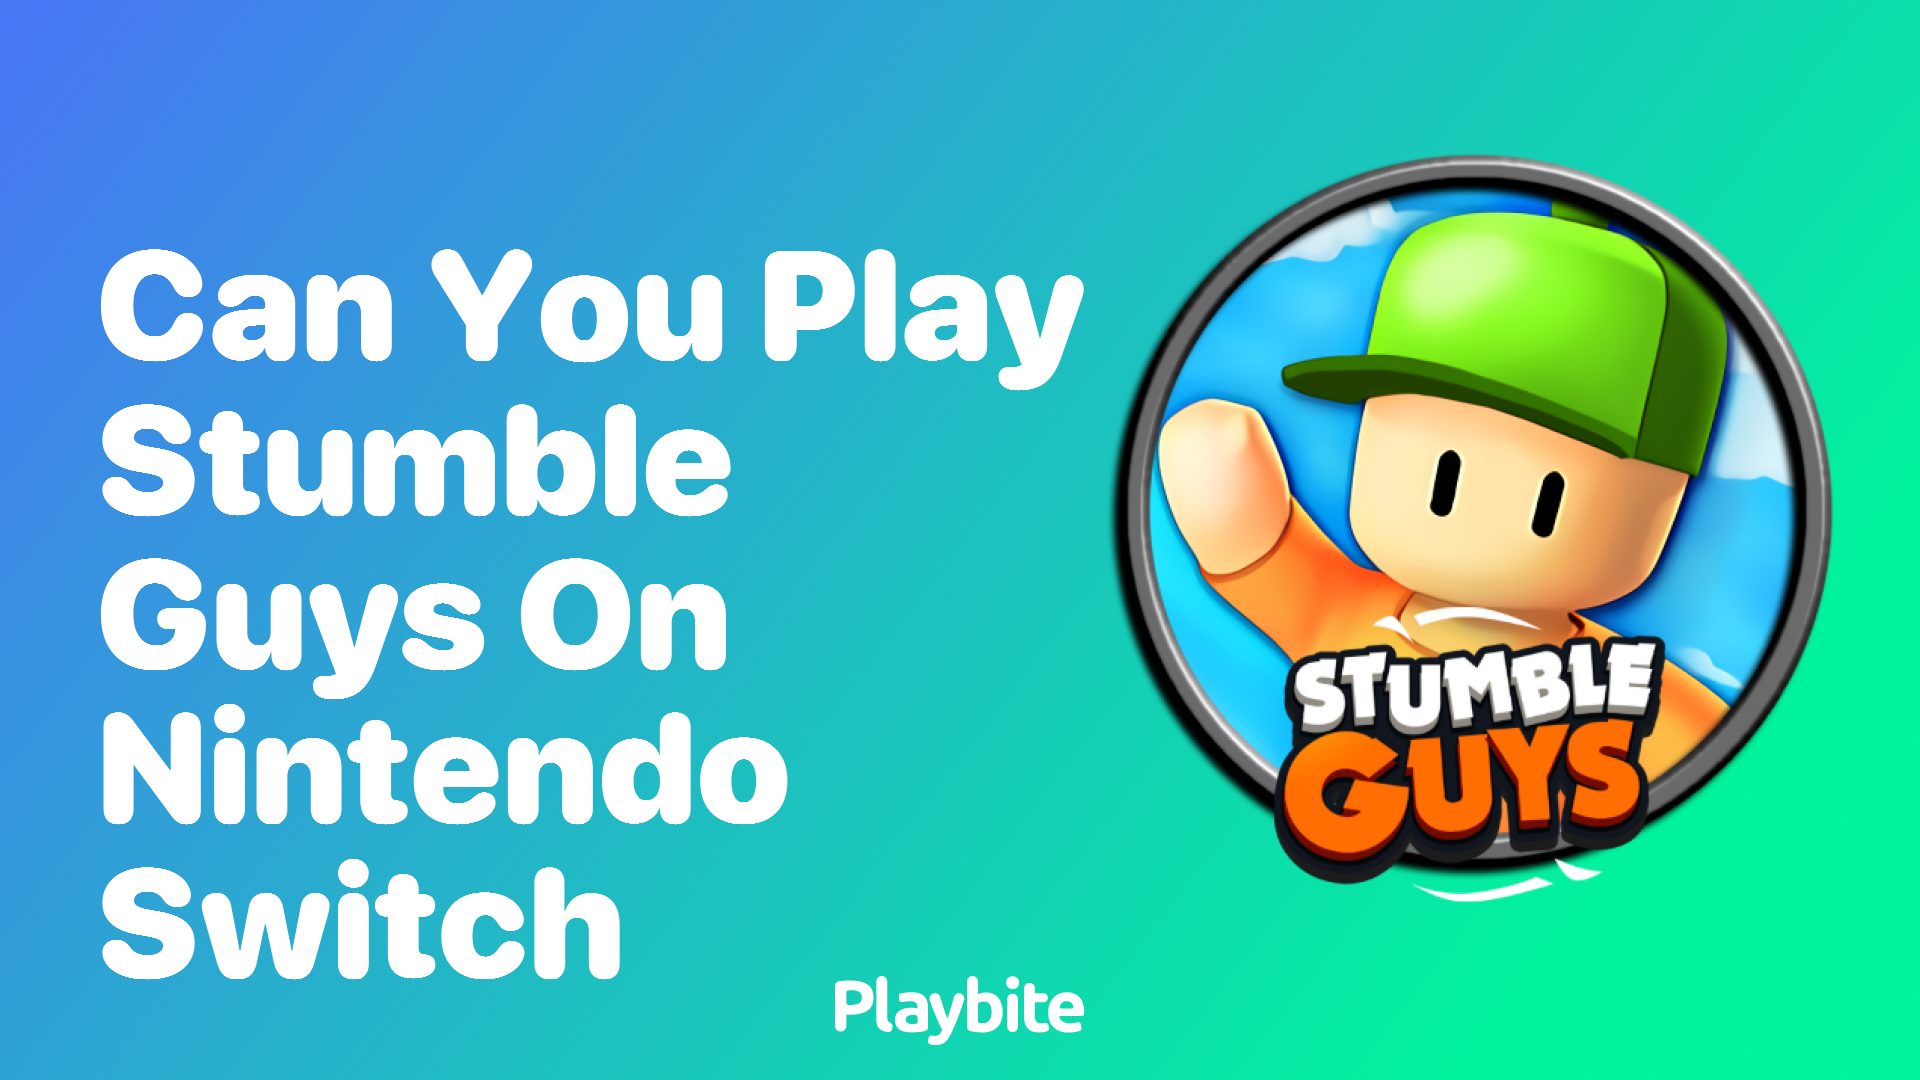 Can You Play Stumble Guys on Nintendo Switch?